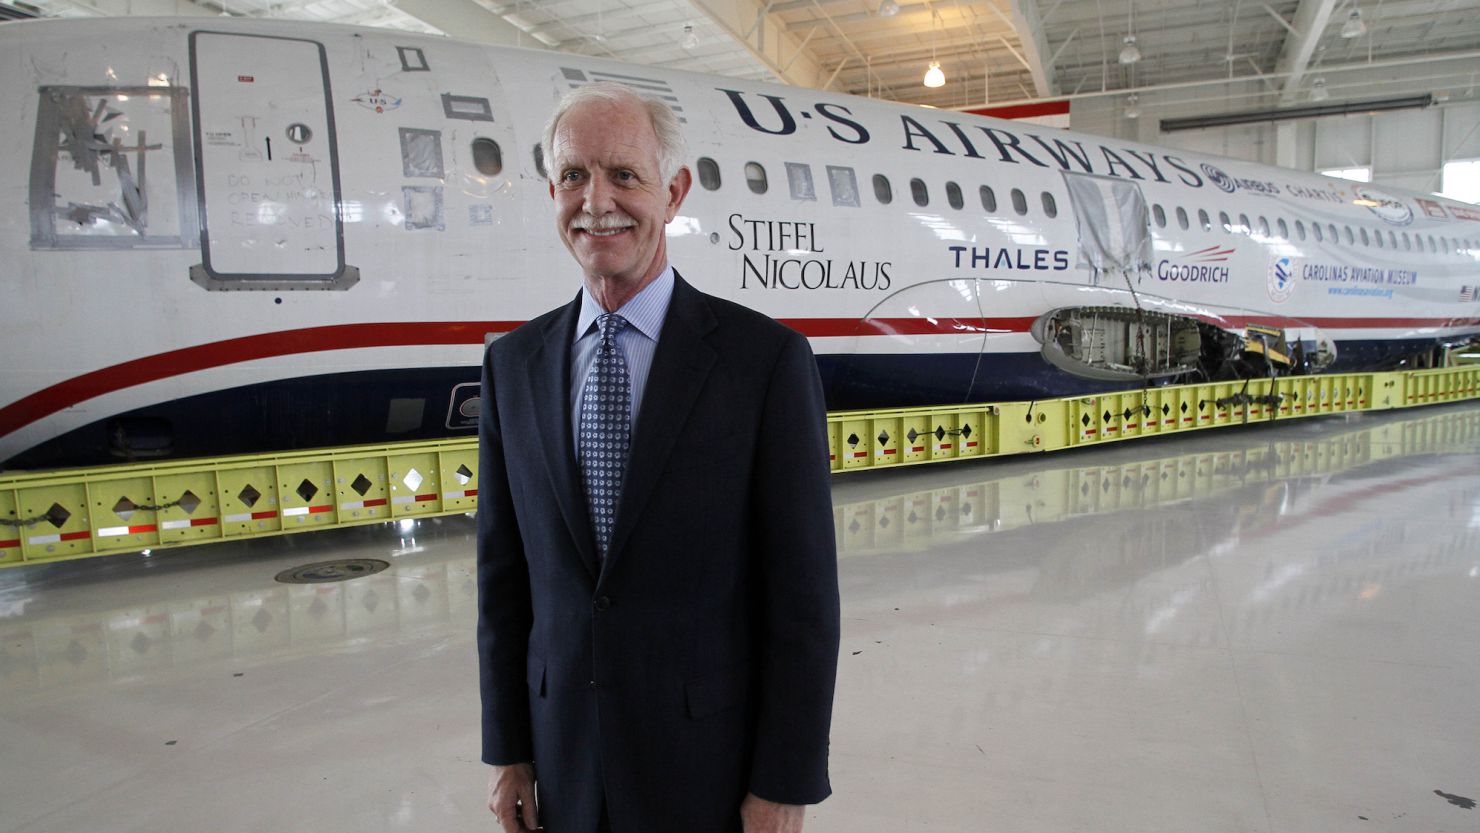 Captain Chesley "Sully" Sullenberger poses in front of the "Miracle on the Hudson" plane.  